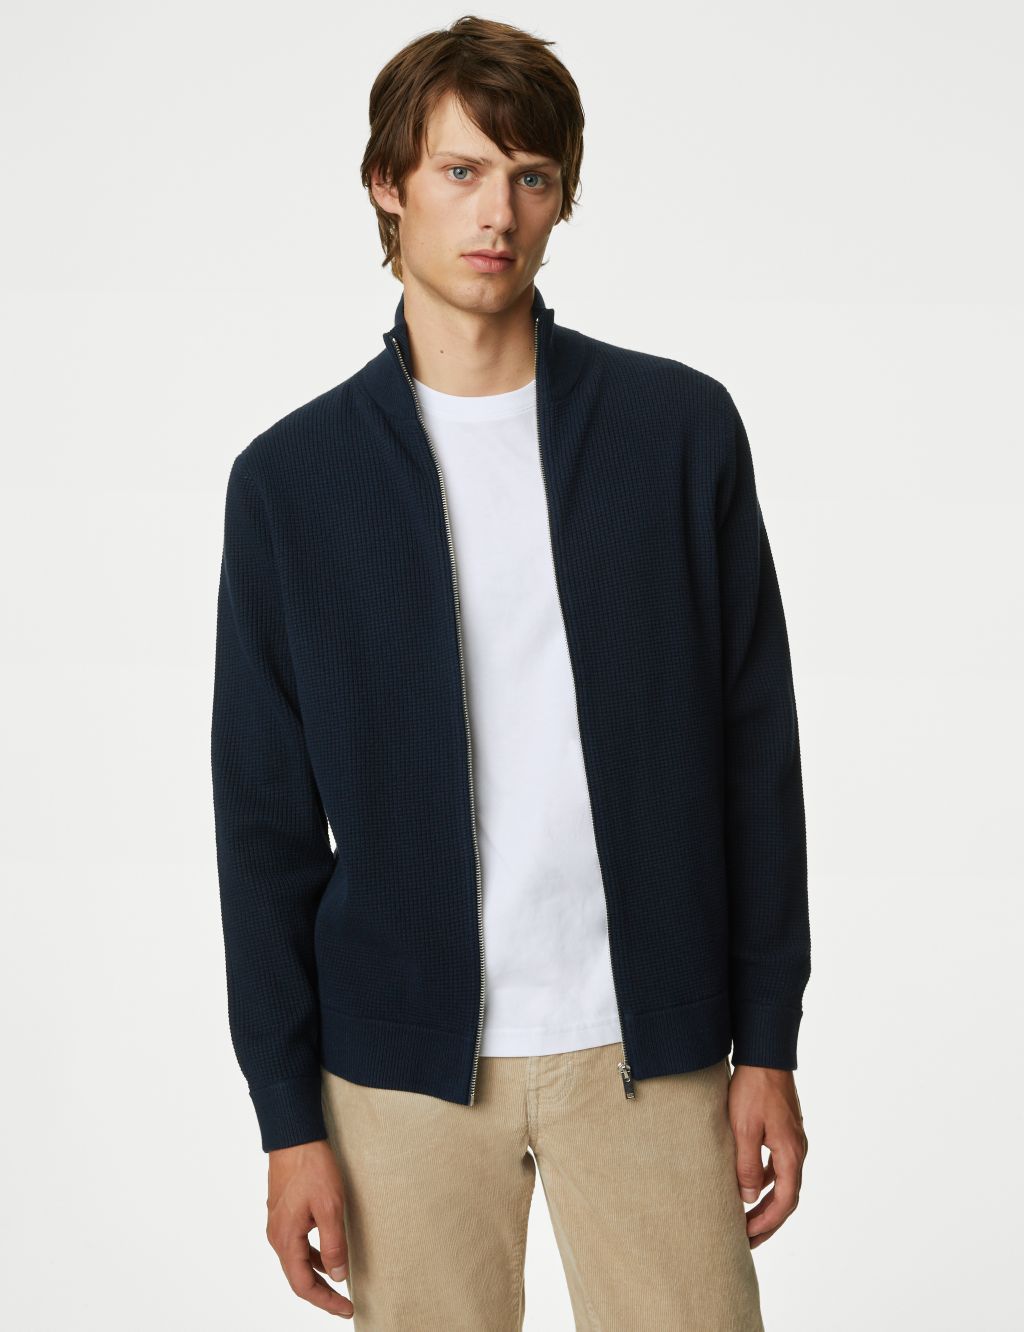 Cotton Blend Zip Up Knitted Jacket image 3